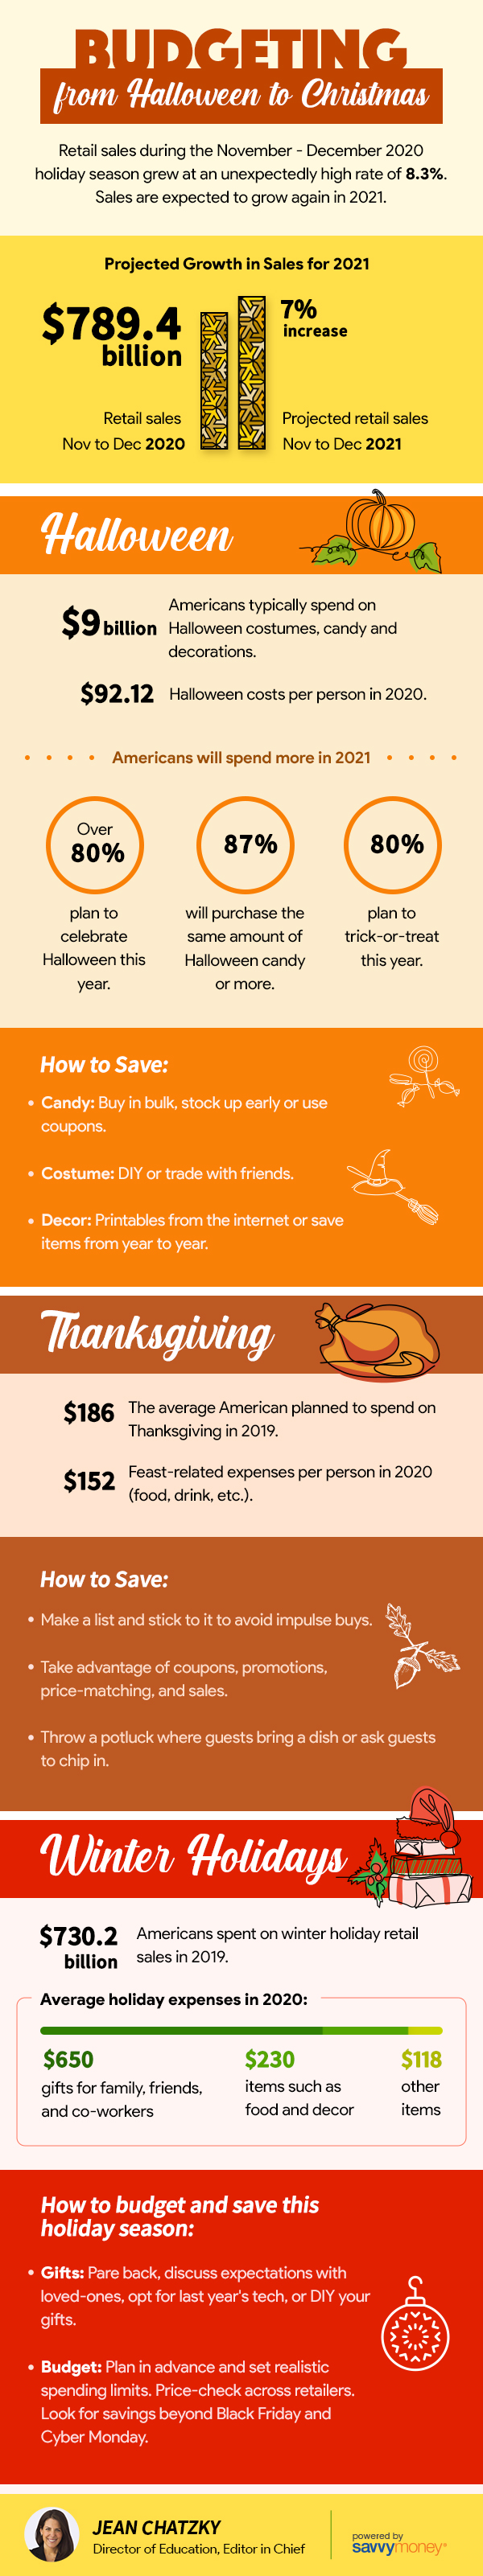 September 2021 Budgeting from Halloween to Christmas